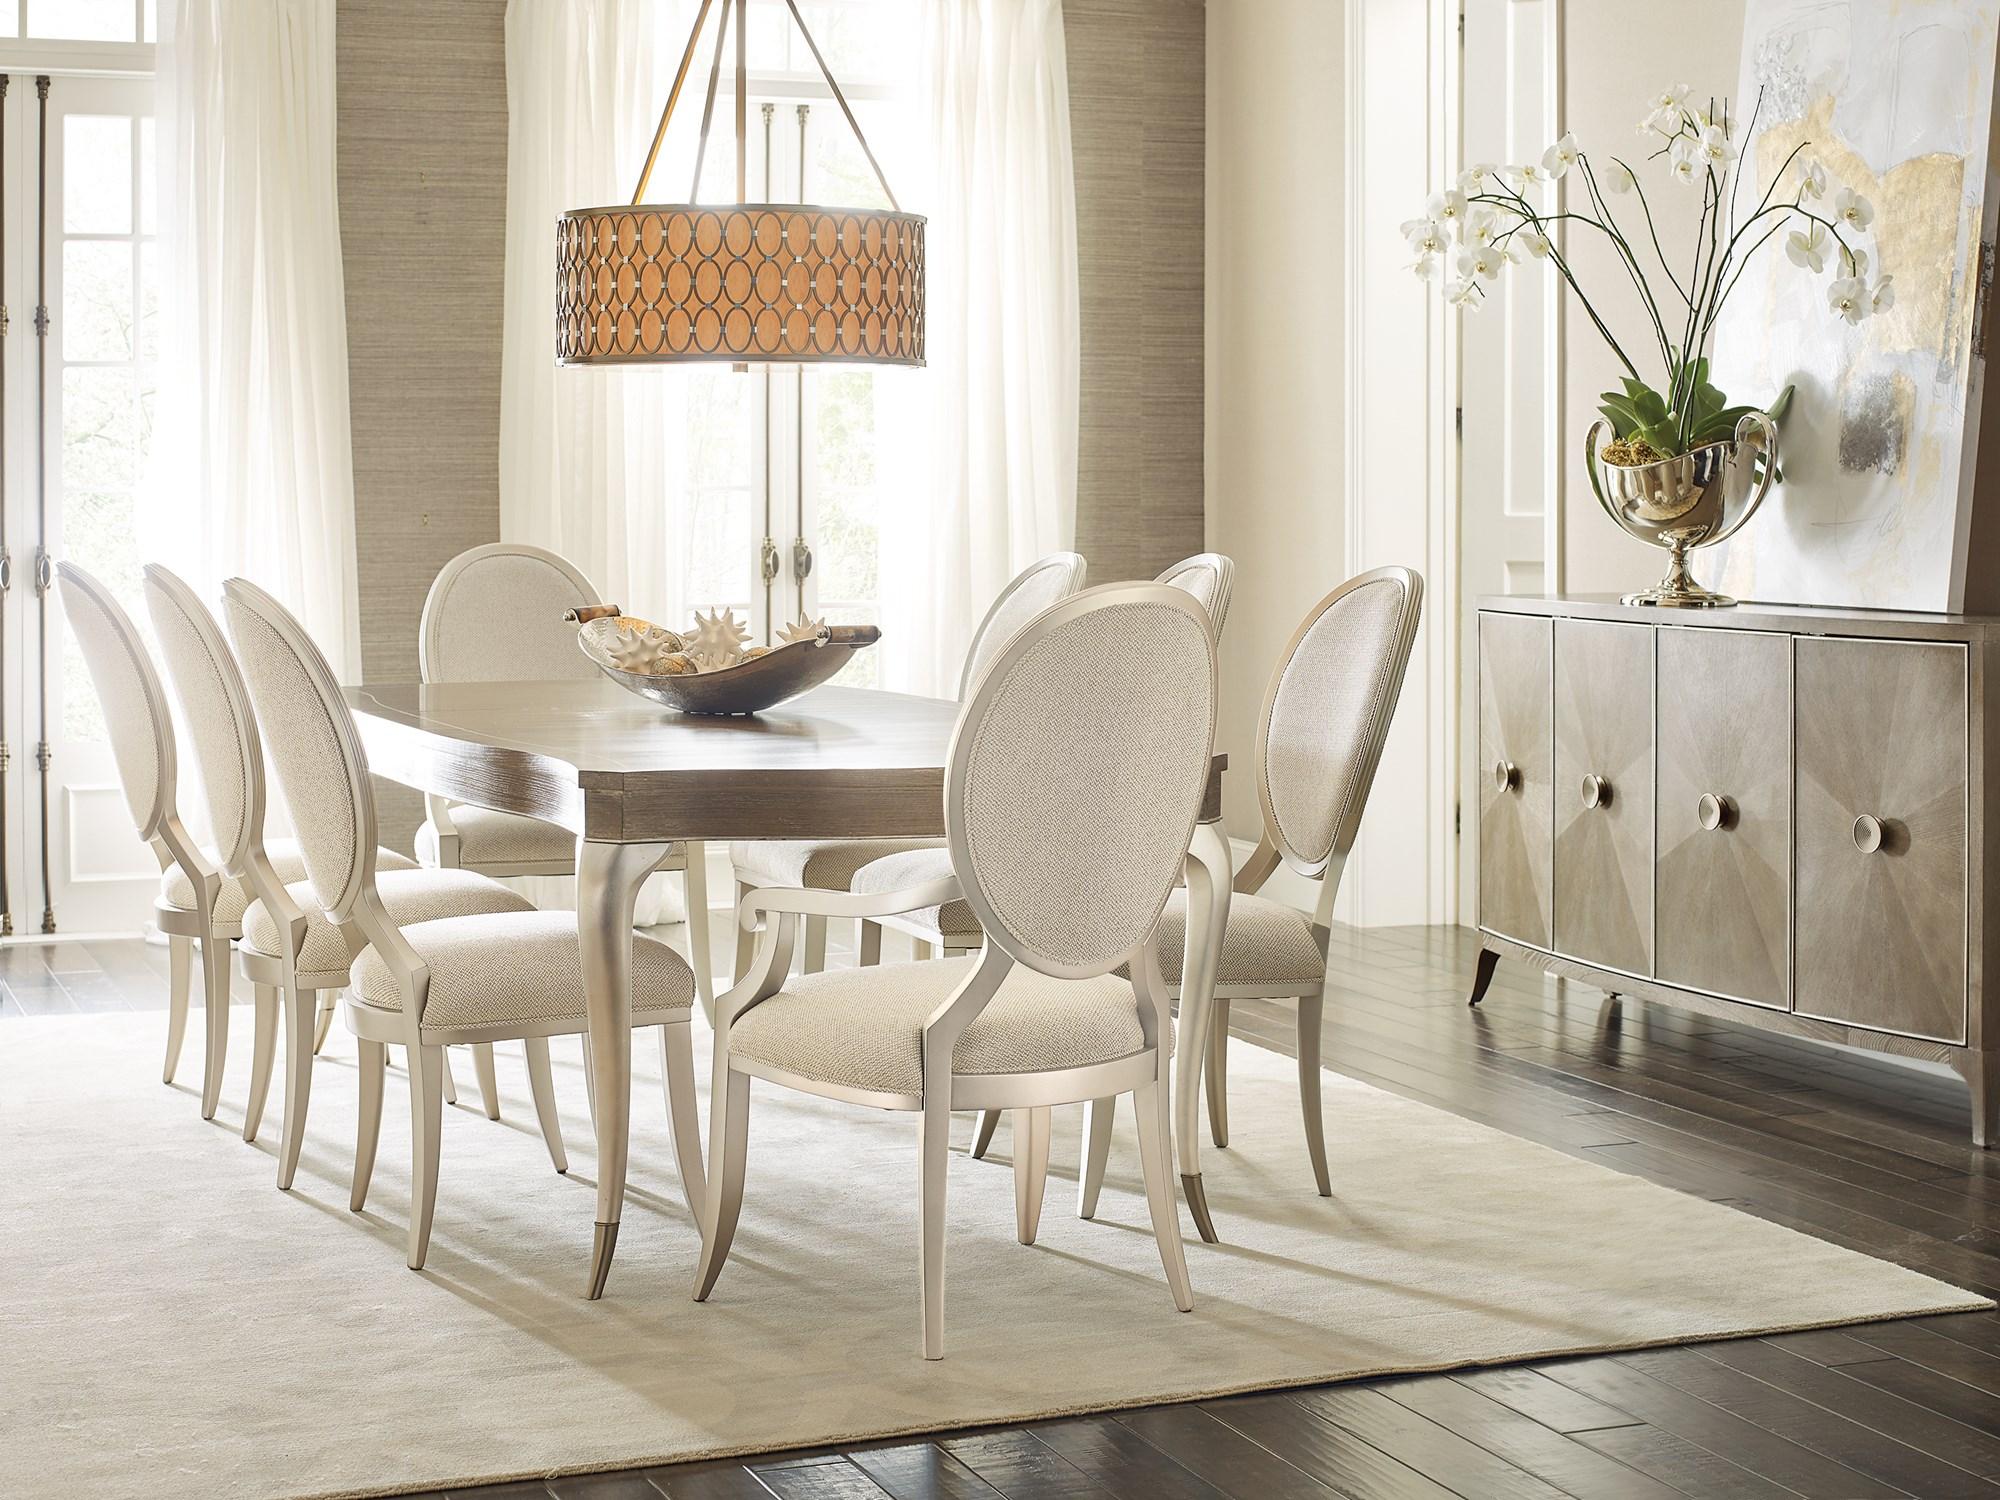 Contemporary Dining Table Set AVONDALE RECTANGLE DINING TABLE / AVONDALE SIDE CHAIR / AVONDALE ARM CHAIR / AVONDALE CREDENZA C022-417-201-Set-10 in Driftwood, Silver Fabric